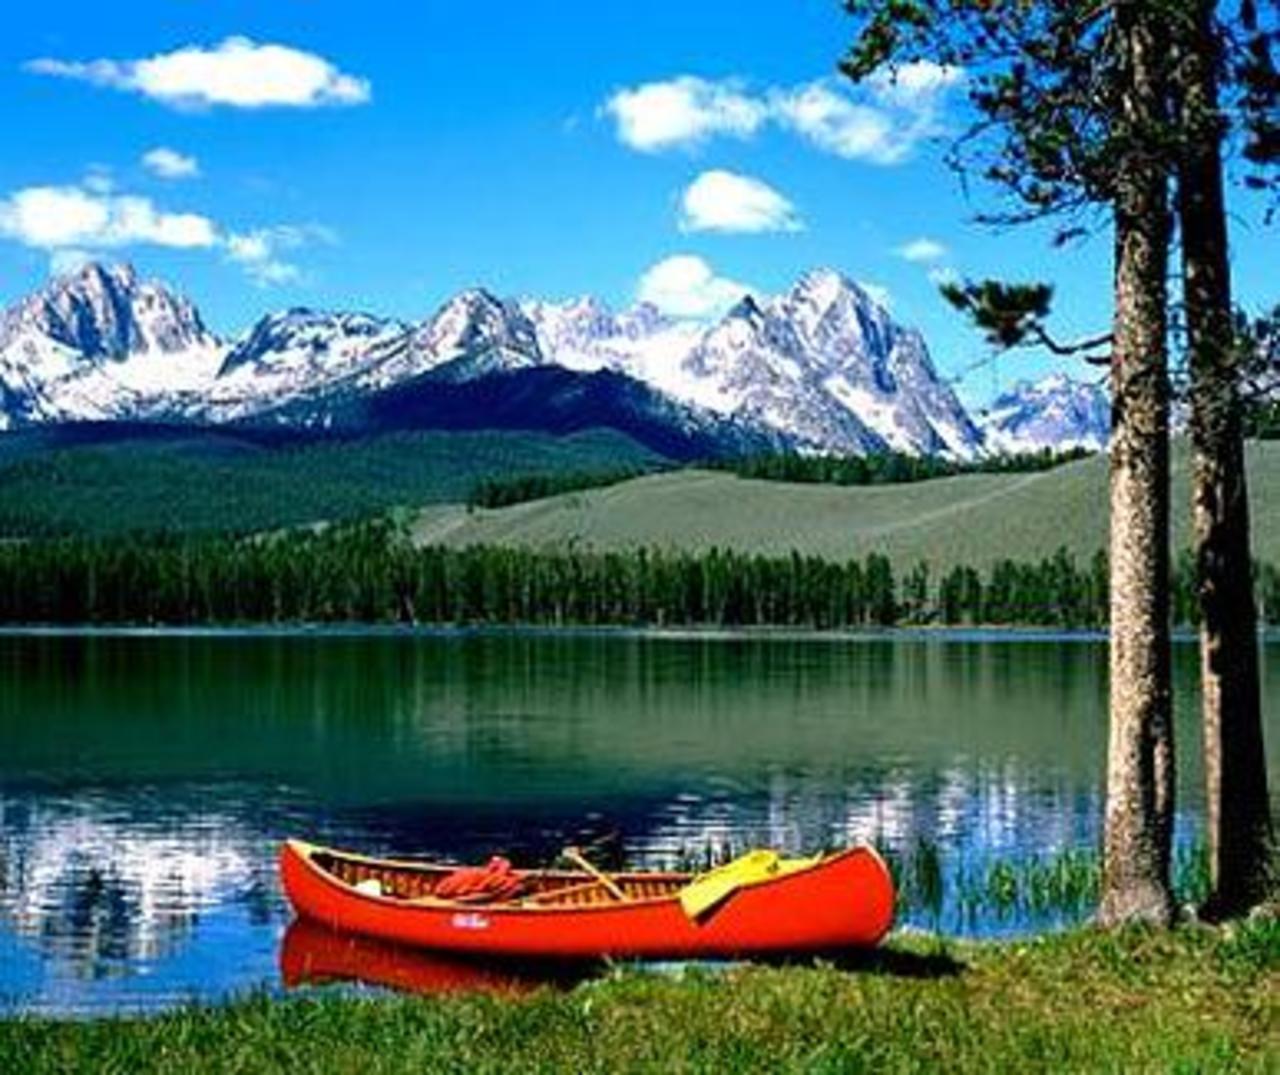 RT FishingQuebec1: RT FlyFishingSimpl: #Backpacking the Sawtooth Mountains of Idaho #camping #hiking #travel #flyf… https://t.co/nGNgJt4JY9